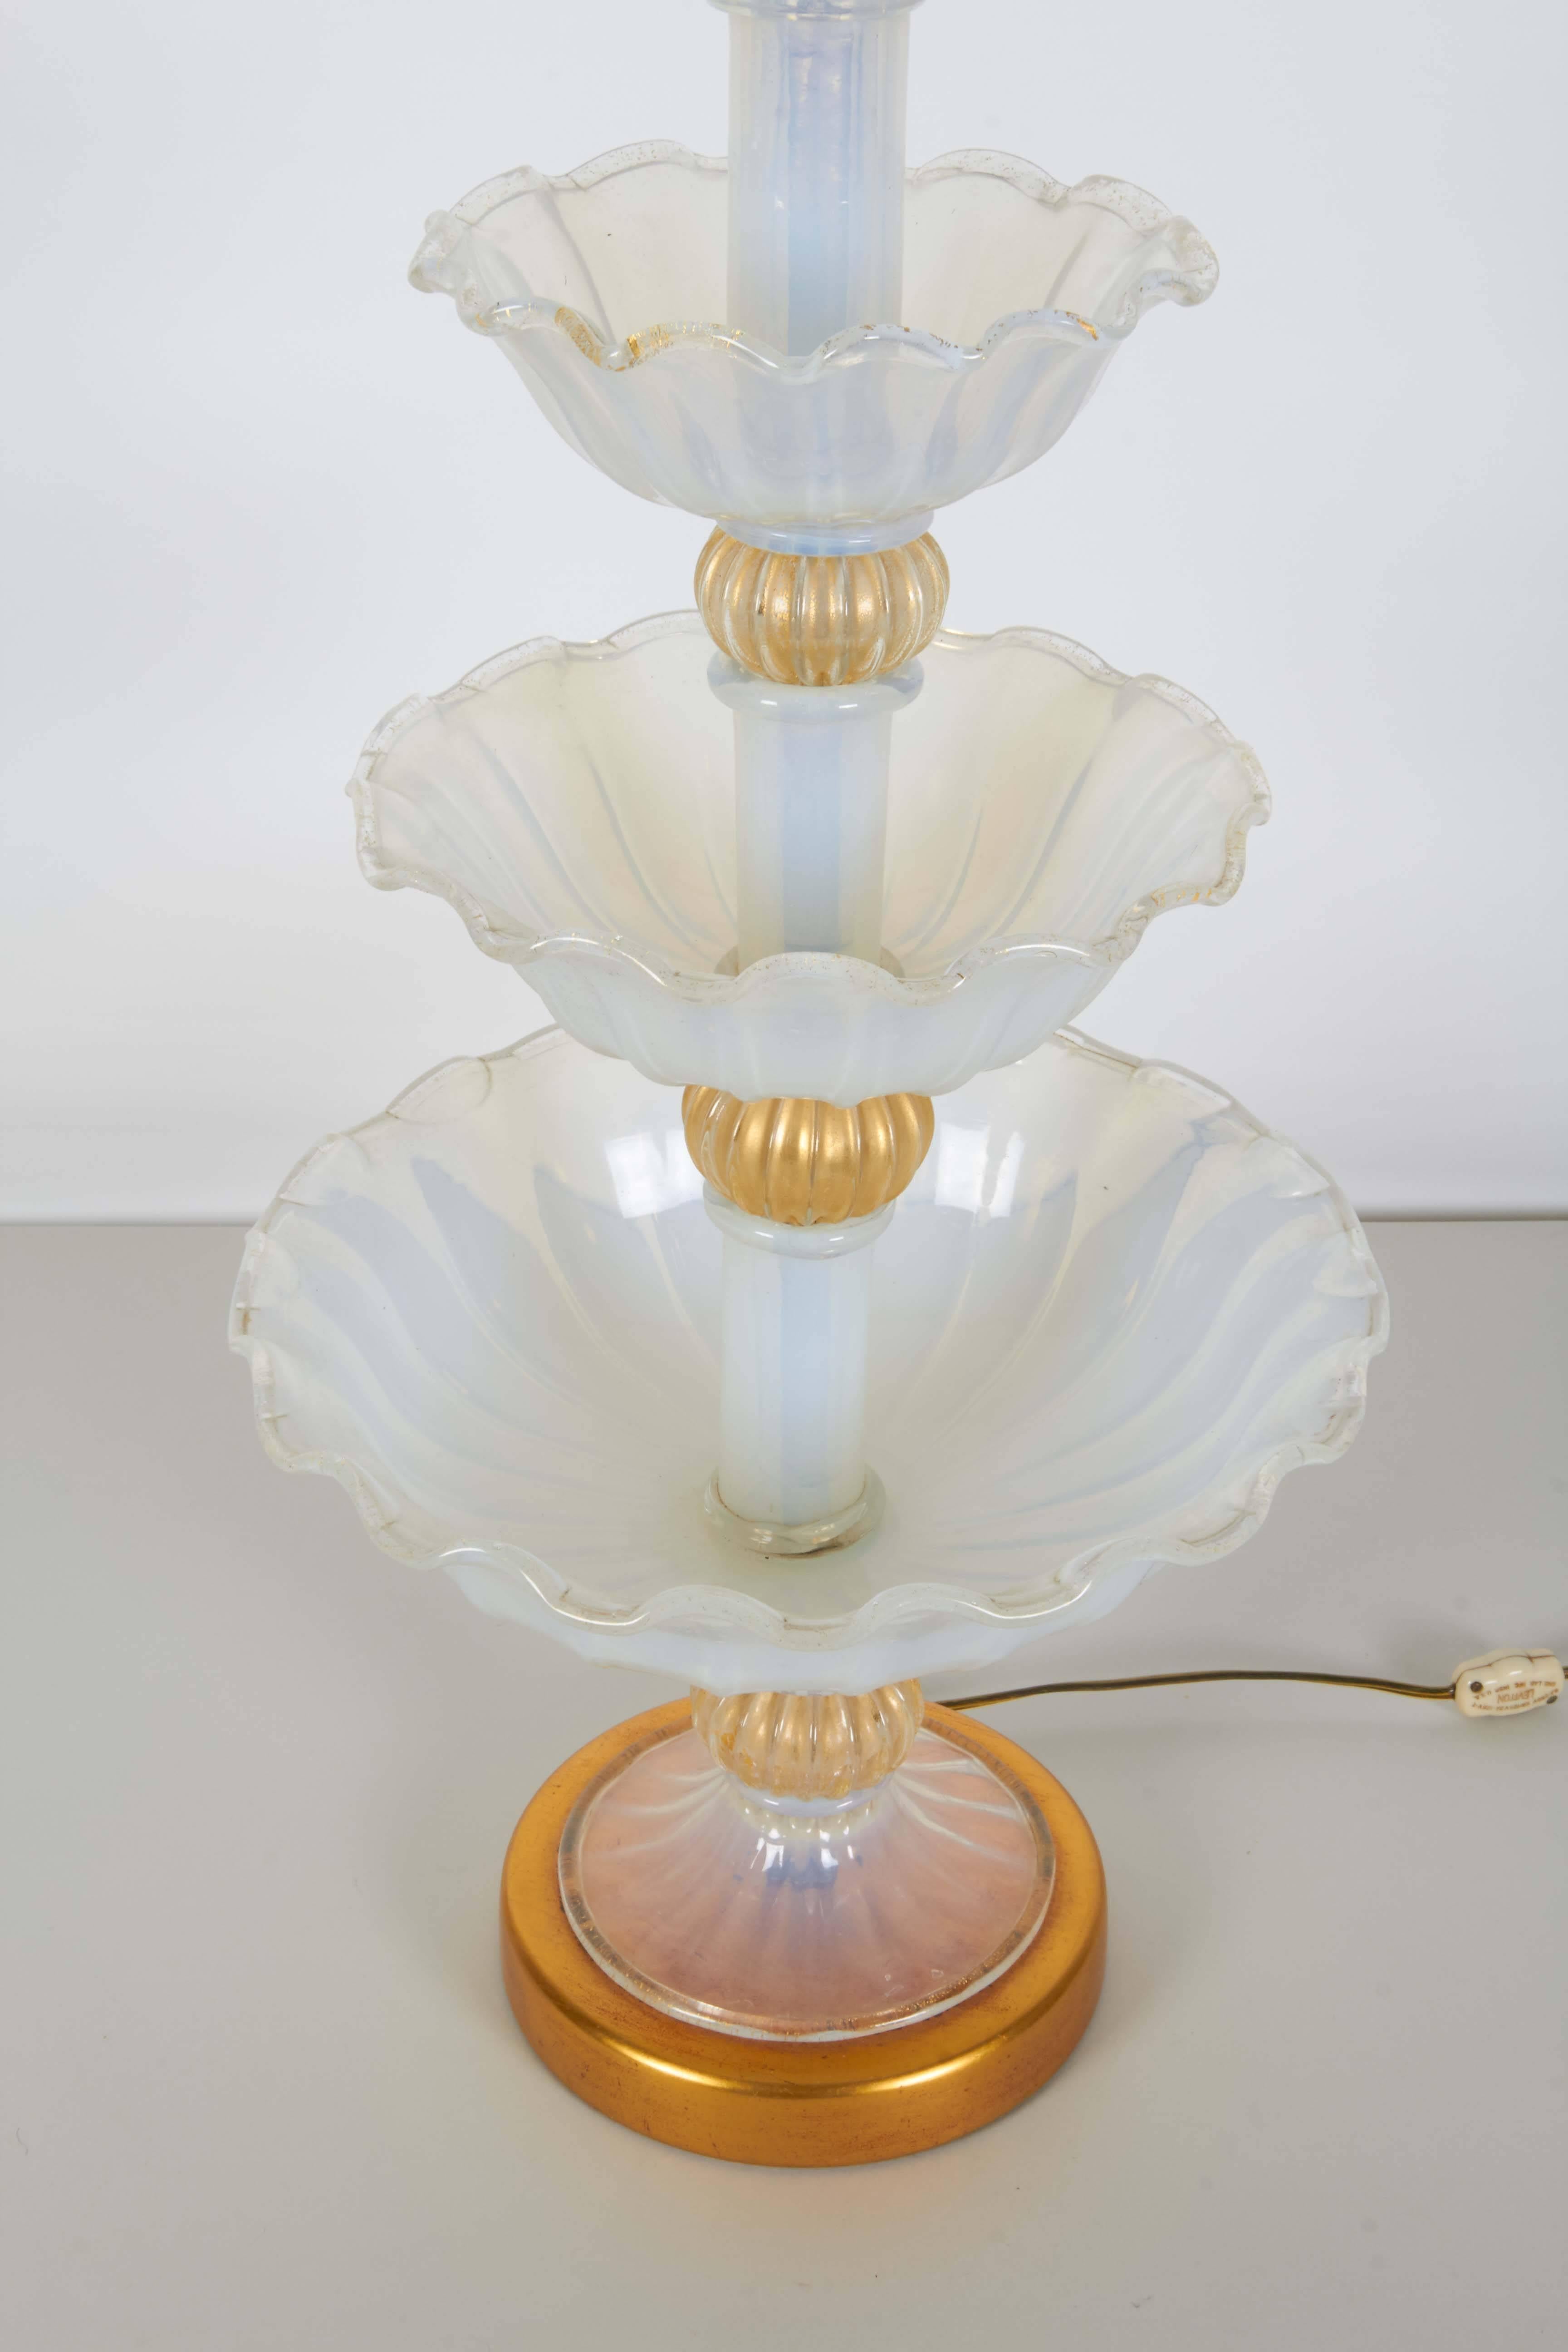 An impressive table lamp in opalescent Murano glass by Seguso, manufactured circa 1950s, with three graduated levels of handblown bowls with ruffled edges, accented with four gold leaf ribbed bulbs, on circular gilt metal base. Wiring and double